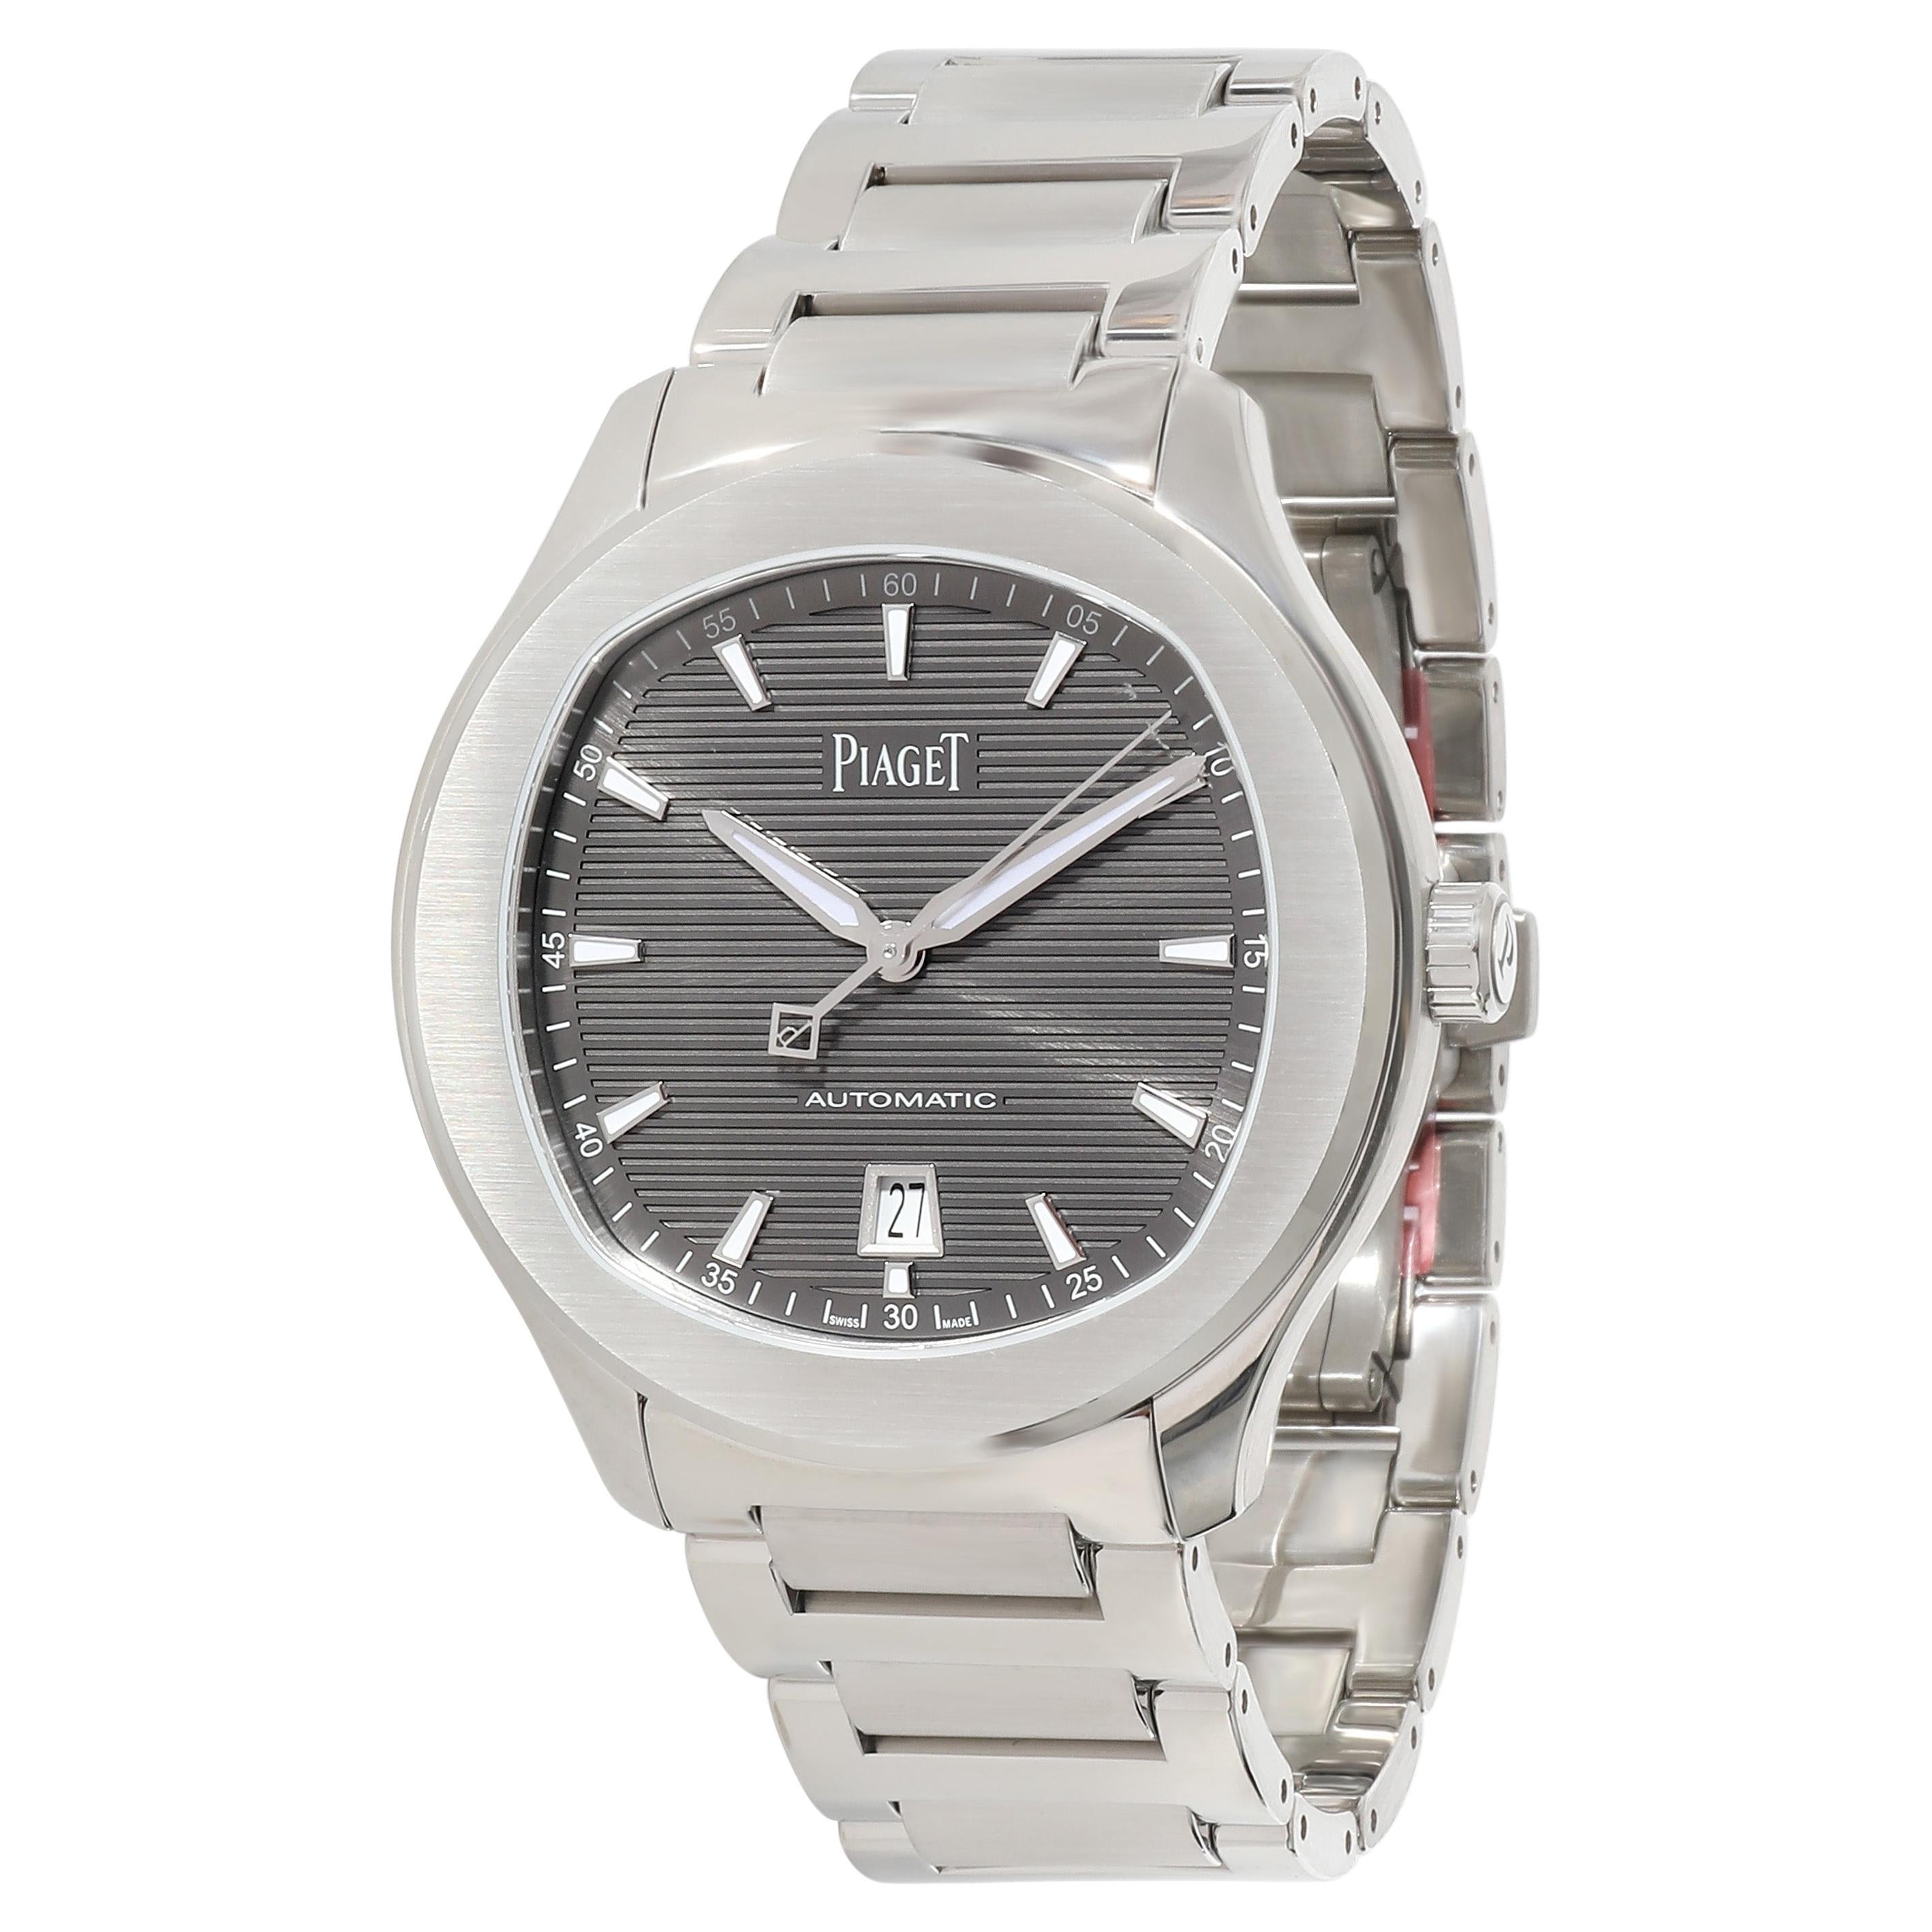 Piaget Polo Date G0A41003 Men's Watch in  Stainless Steel